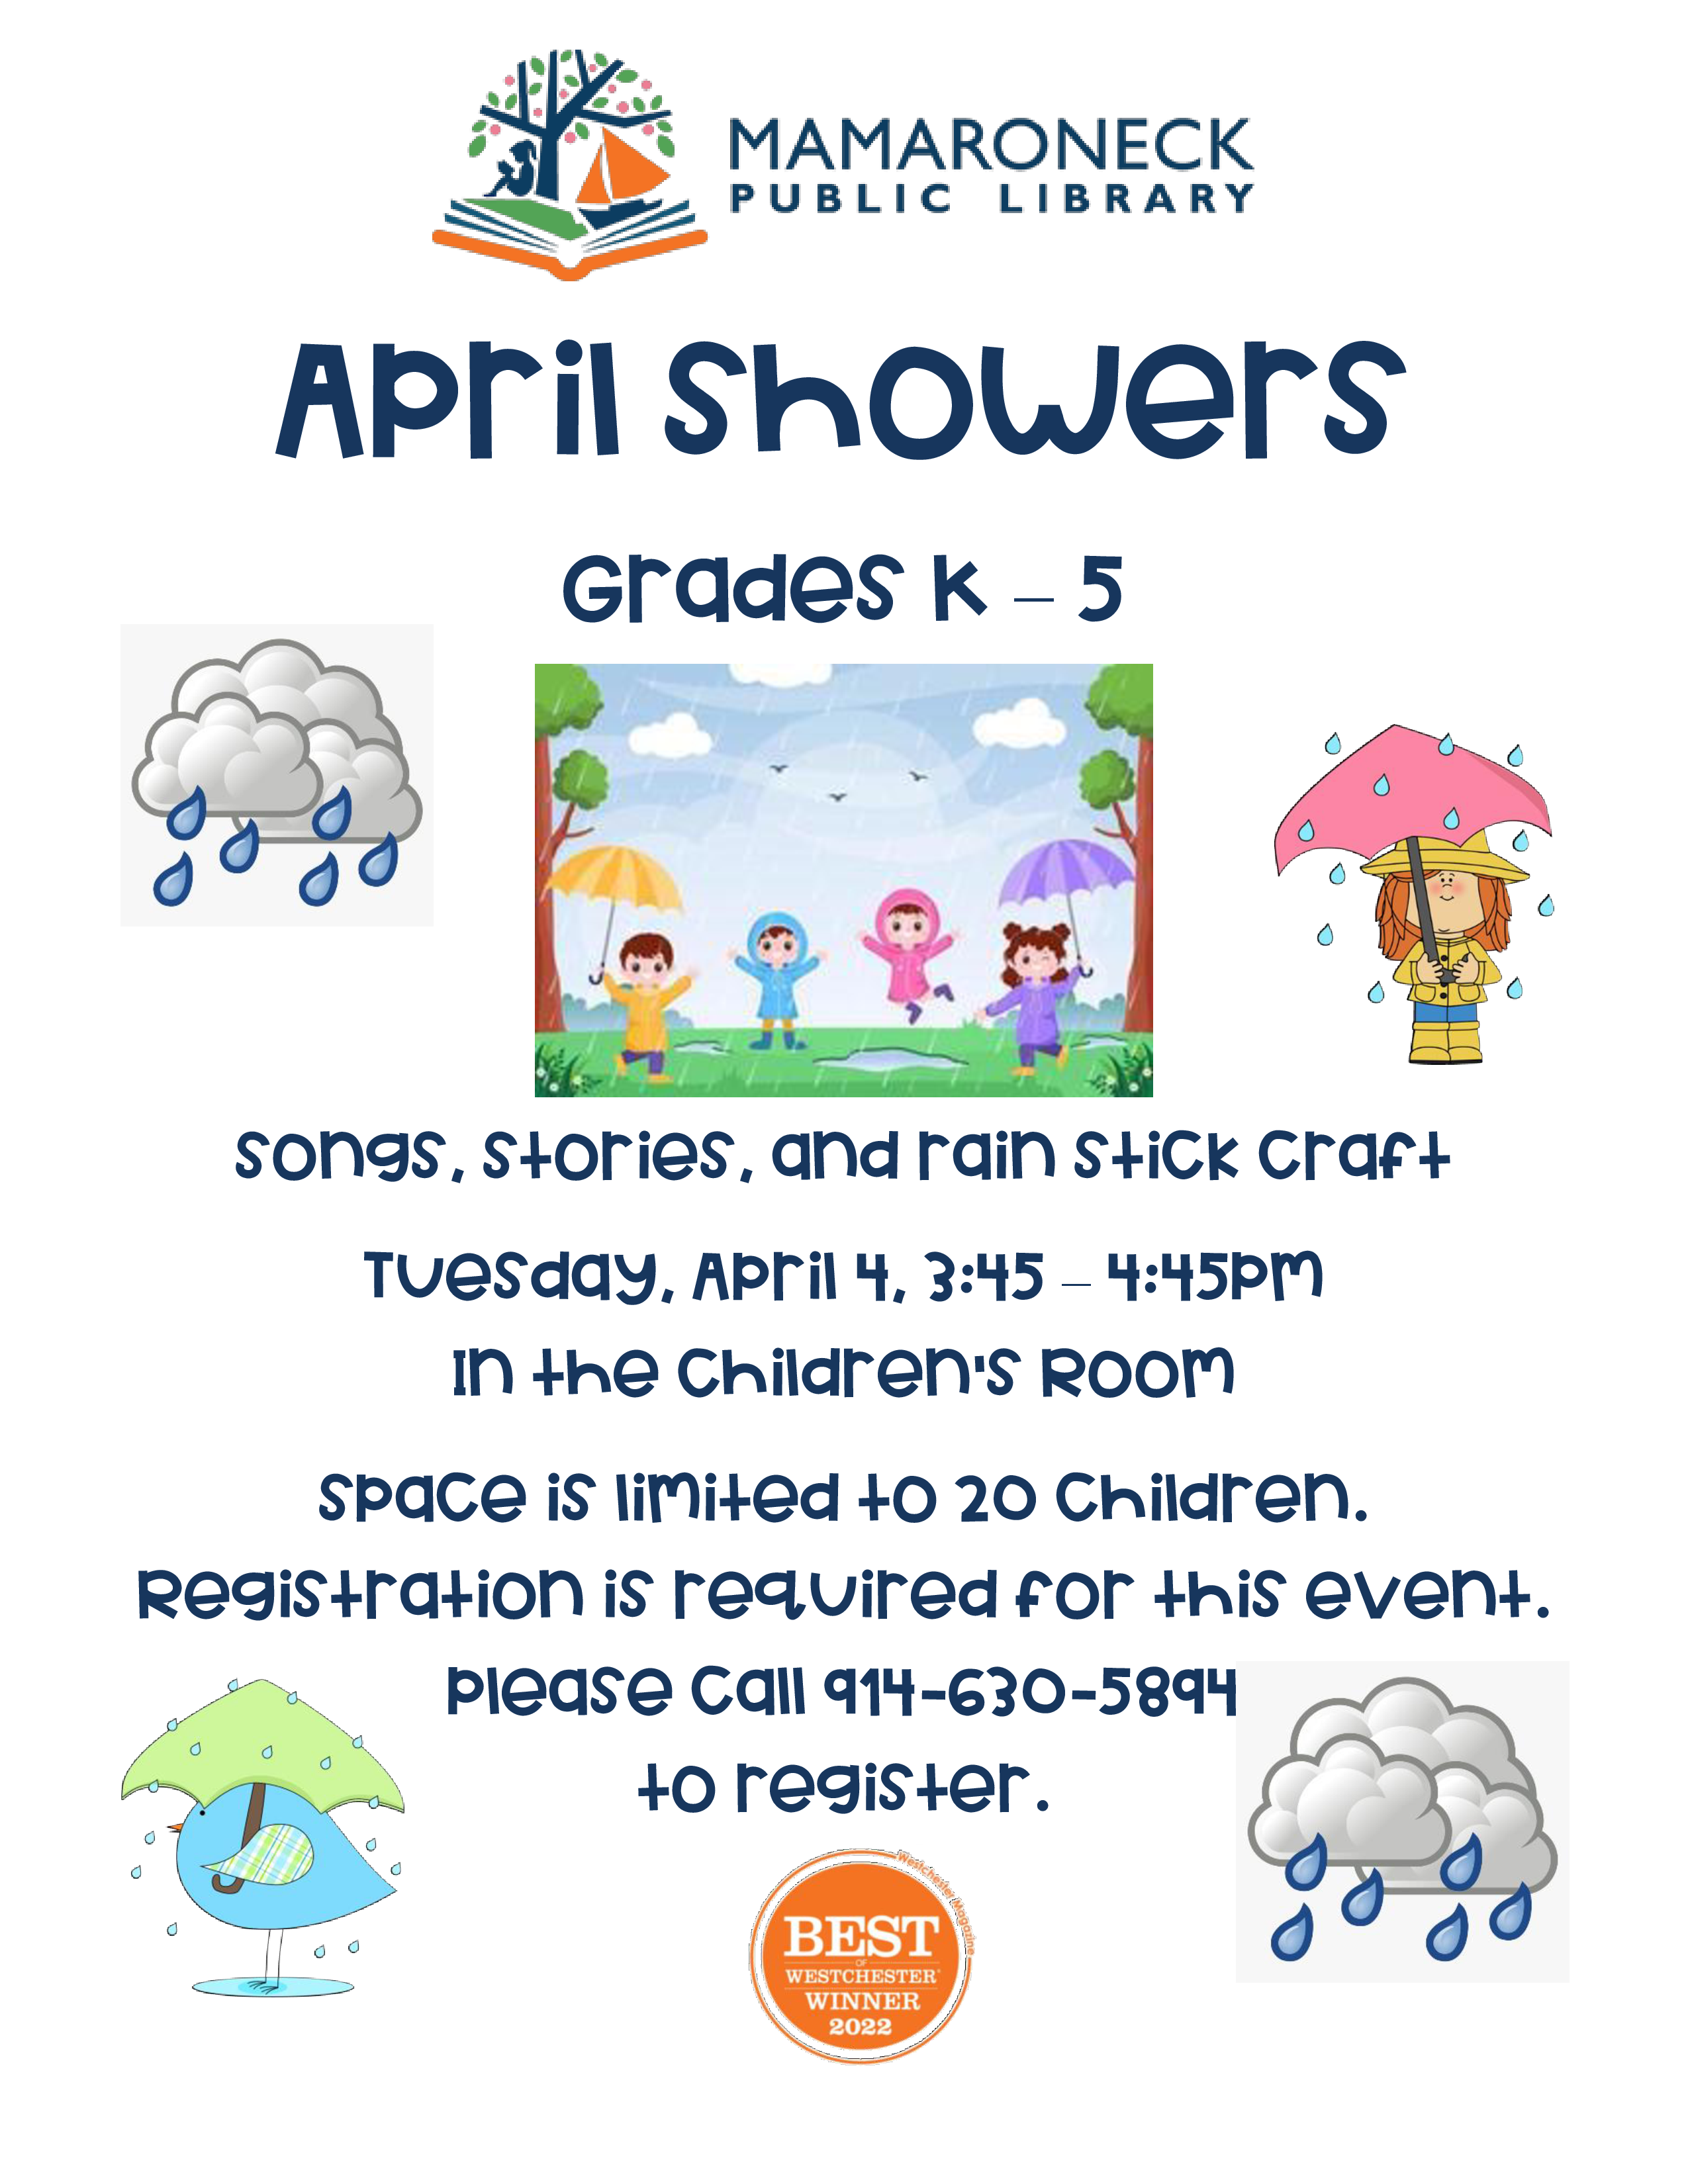 4/4 @ 3:45 - 4:45 in the children's room - grades k - 5 - April showers - songs, stories, and rain stick craft